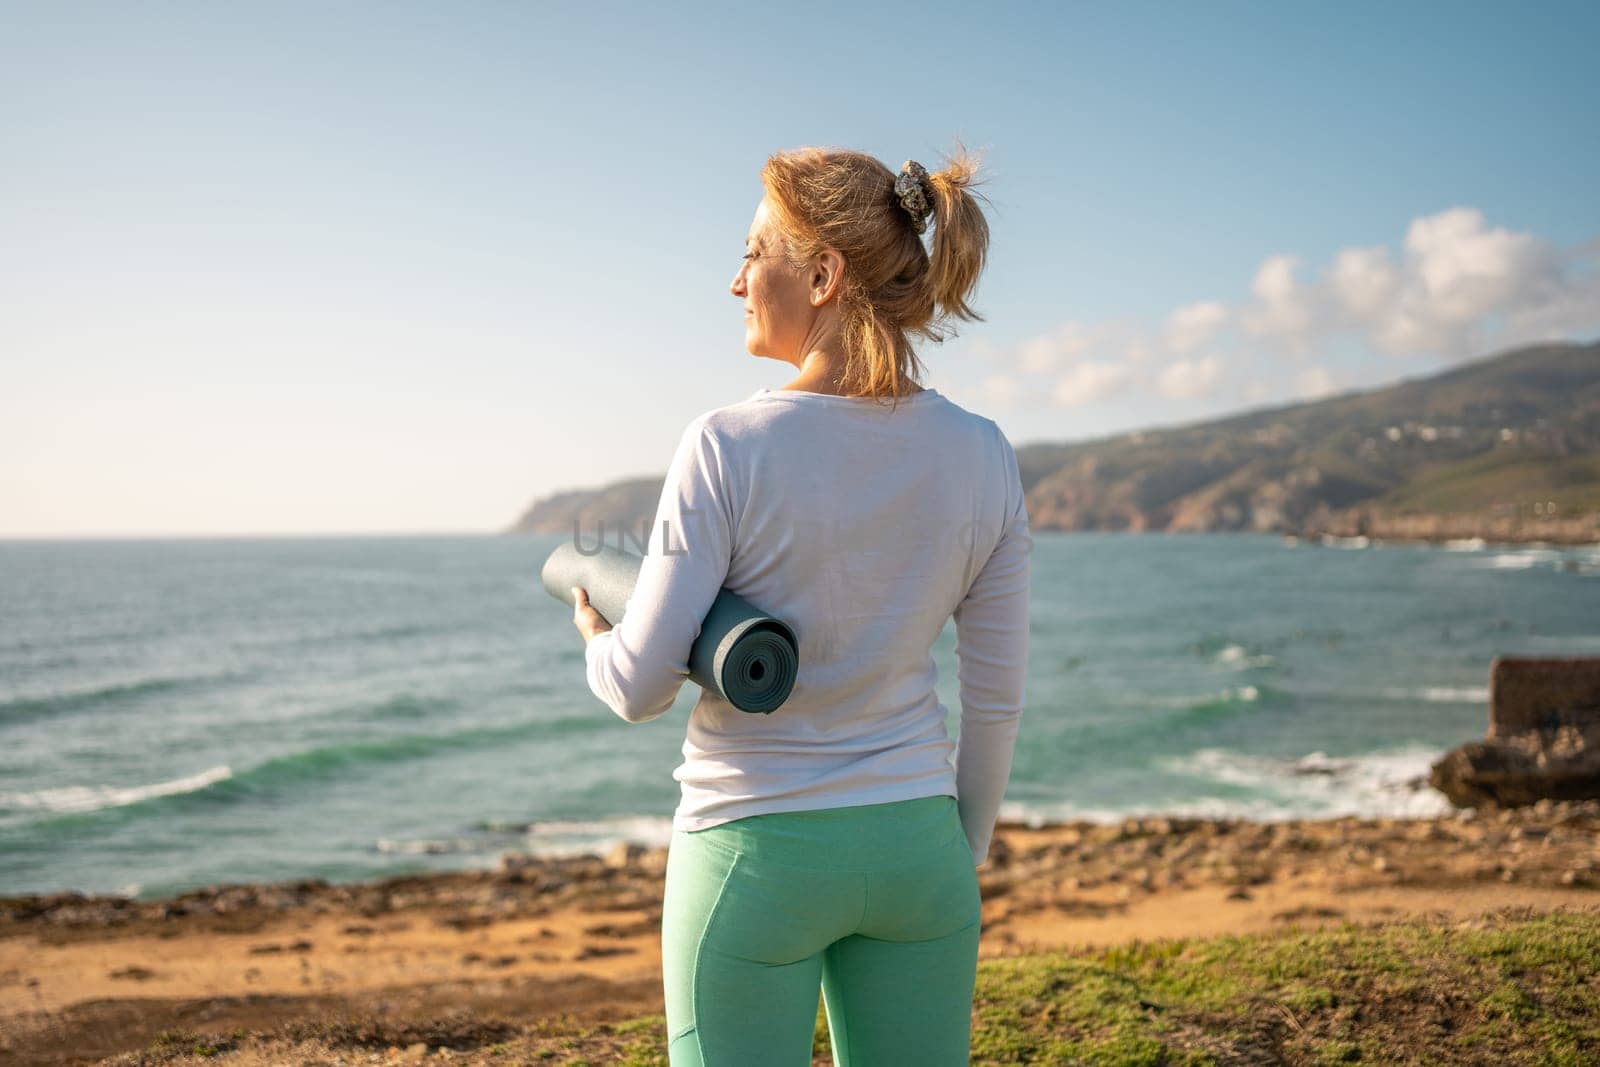 Mature woman with yoga mat standing on coast. Pensioner female looking ocean waves while holding sport mat.Back view fit senior woman wearing sport clothes preparing to do yoga on sea shore